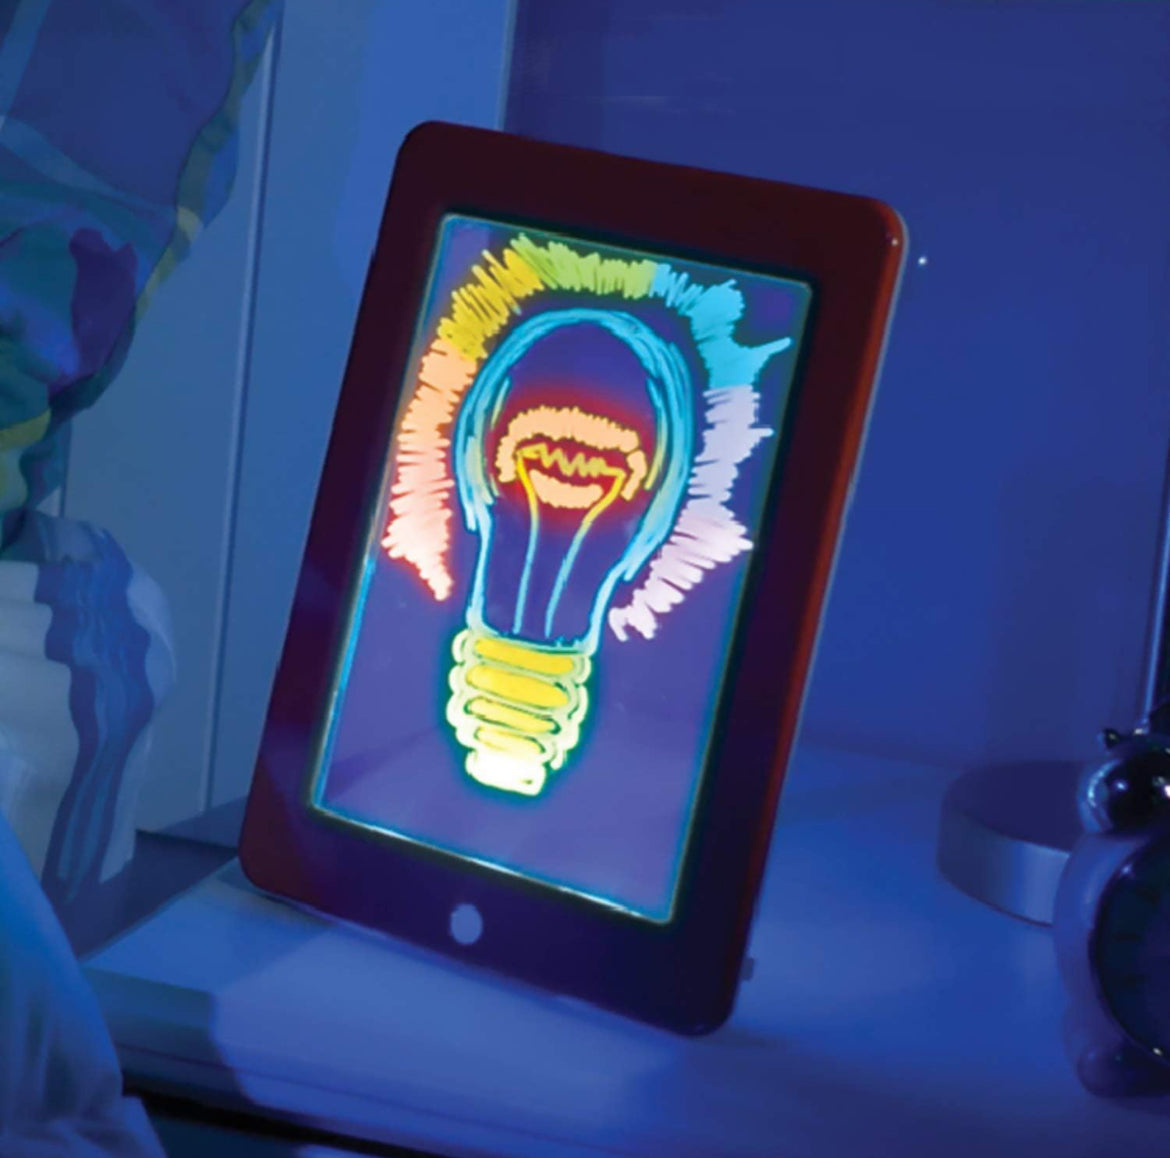 Light up! LED Drawing pad tablet, glow in the dark - Kidspark